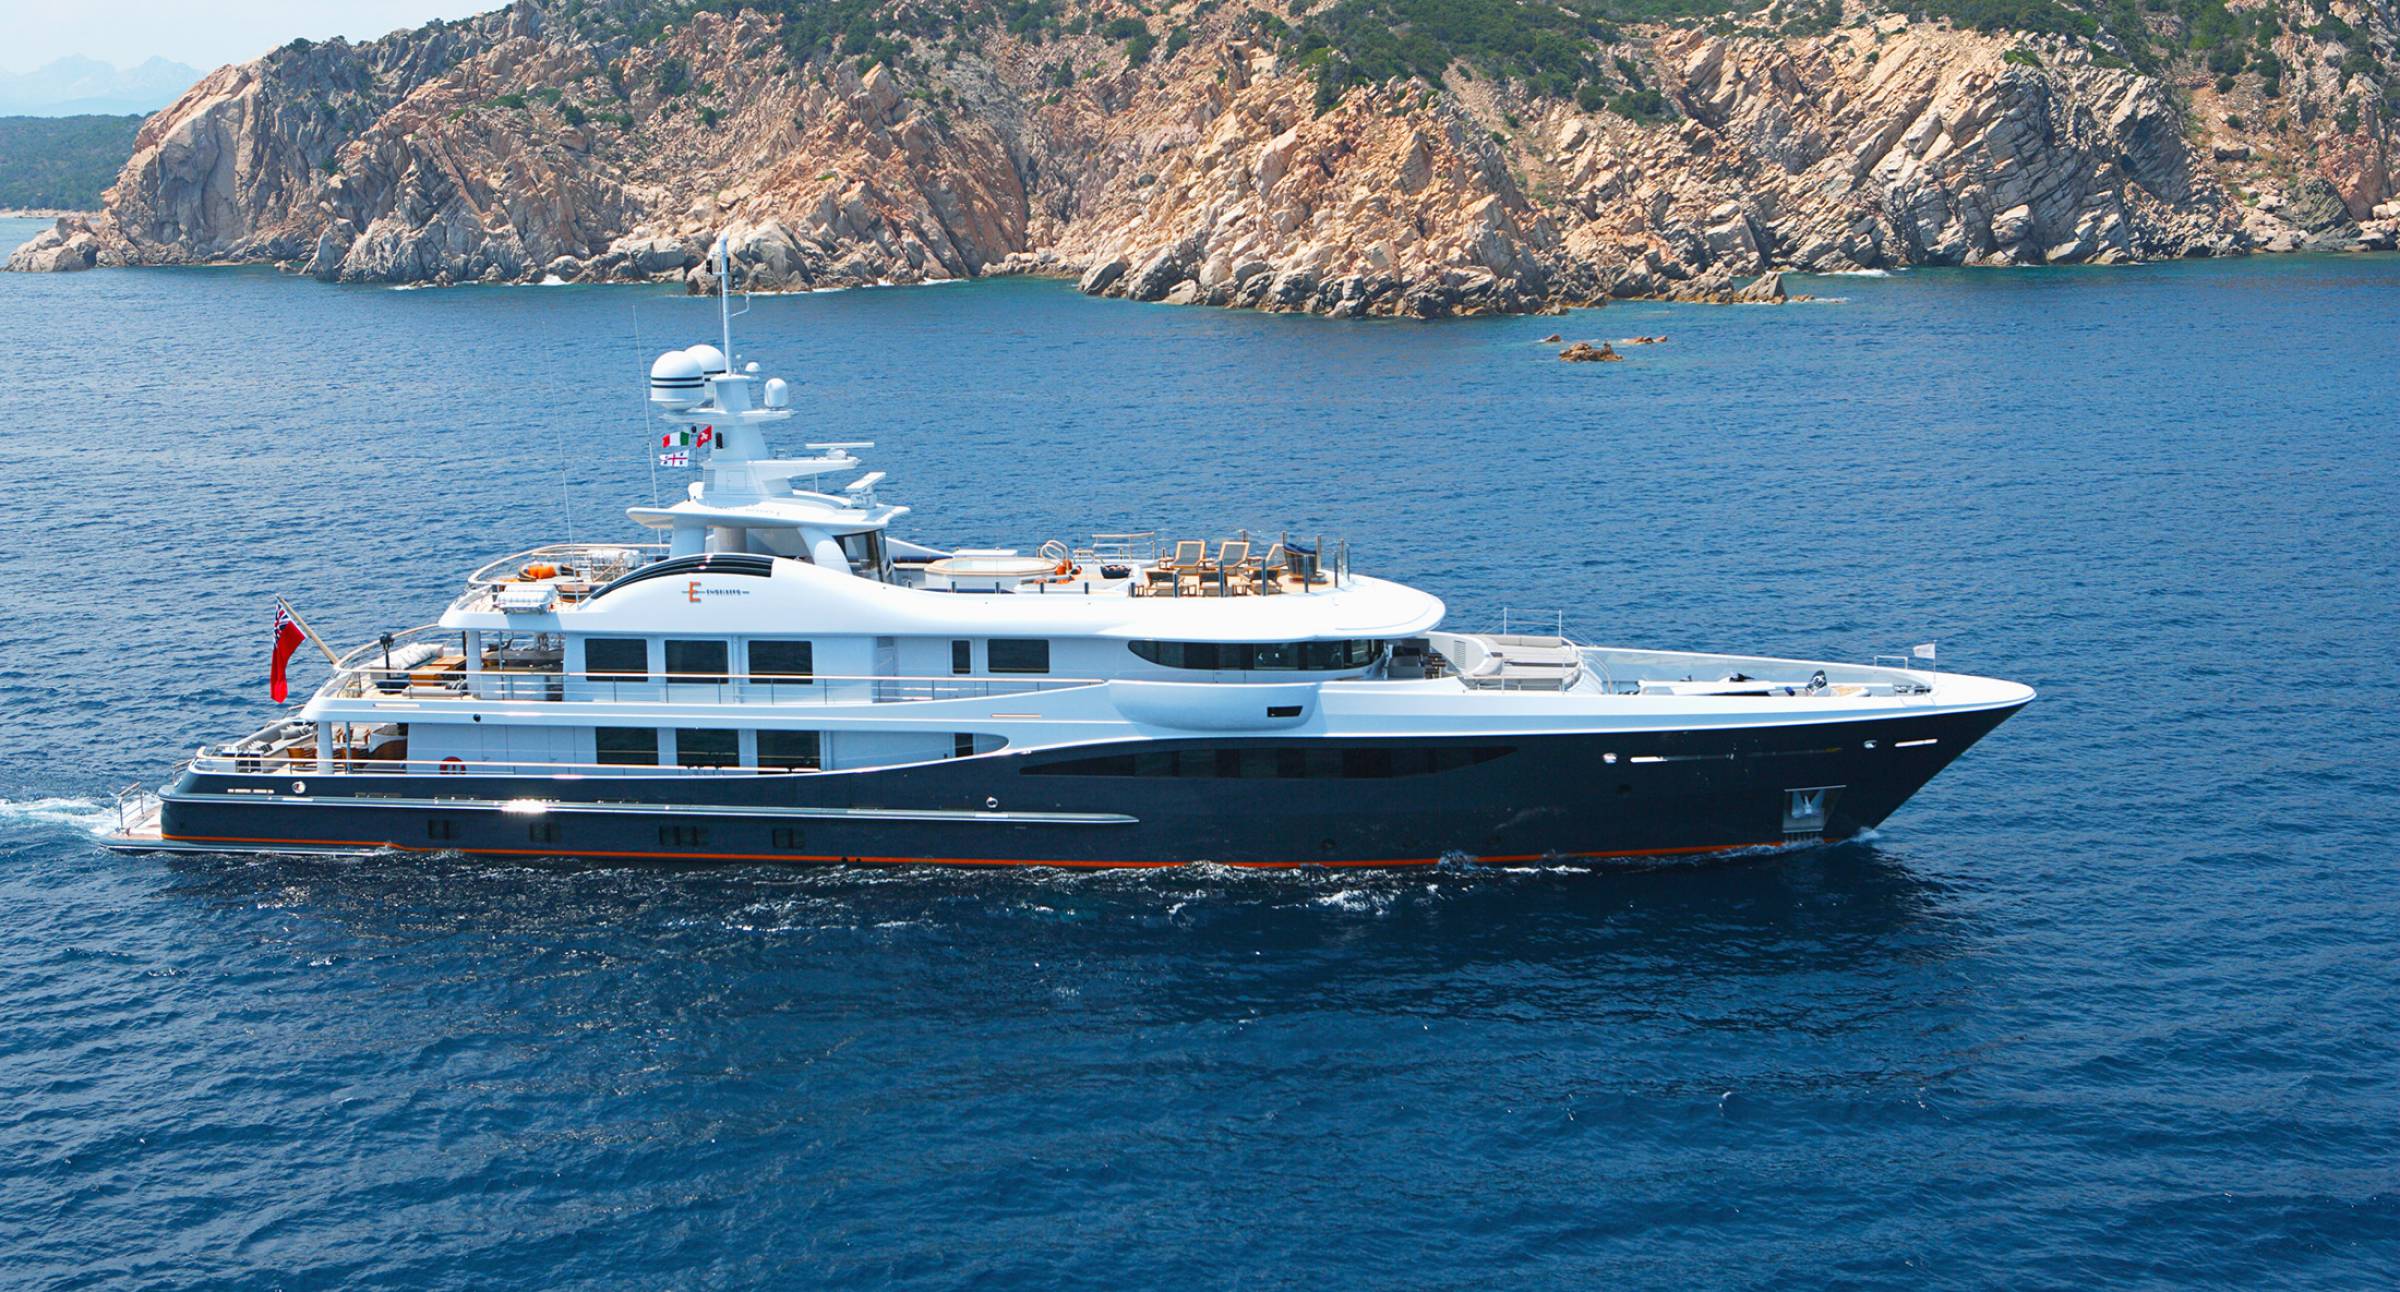 Amels 180 Yacht - Moored In The Mediterranean